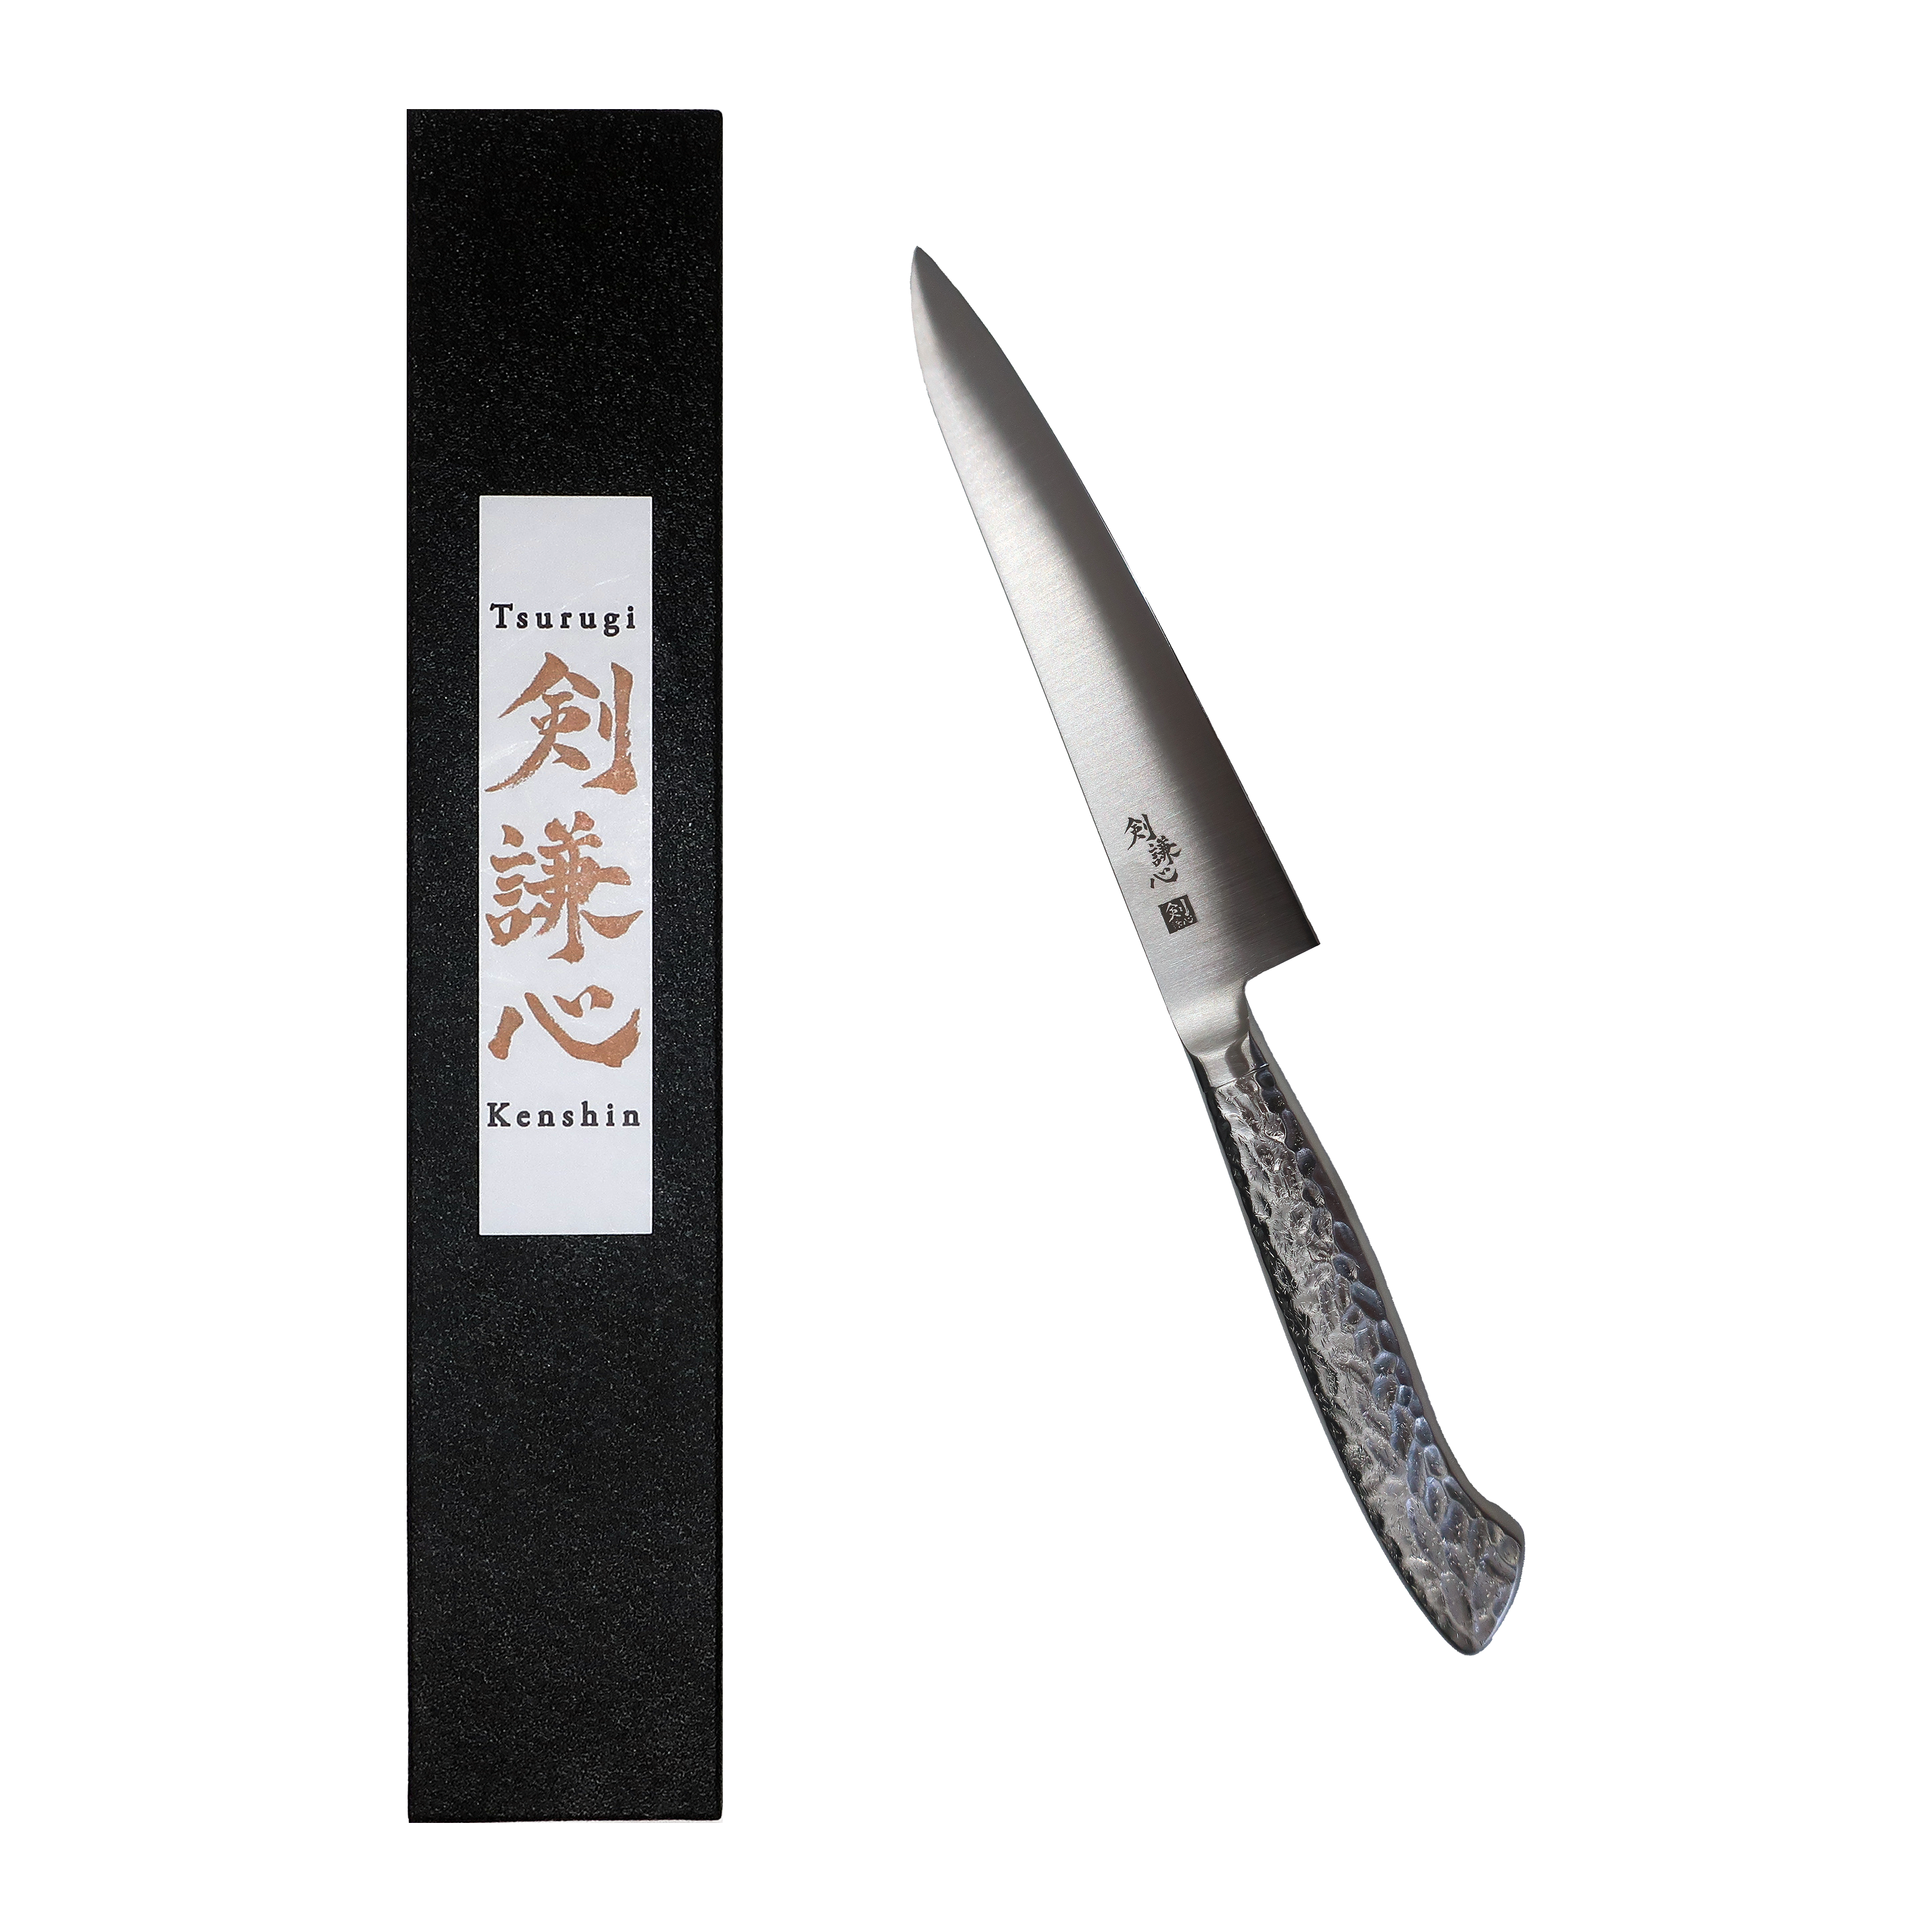 Stainless steel handle Petty knife 150mm (DK-150M-MO-V)